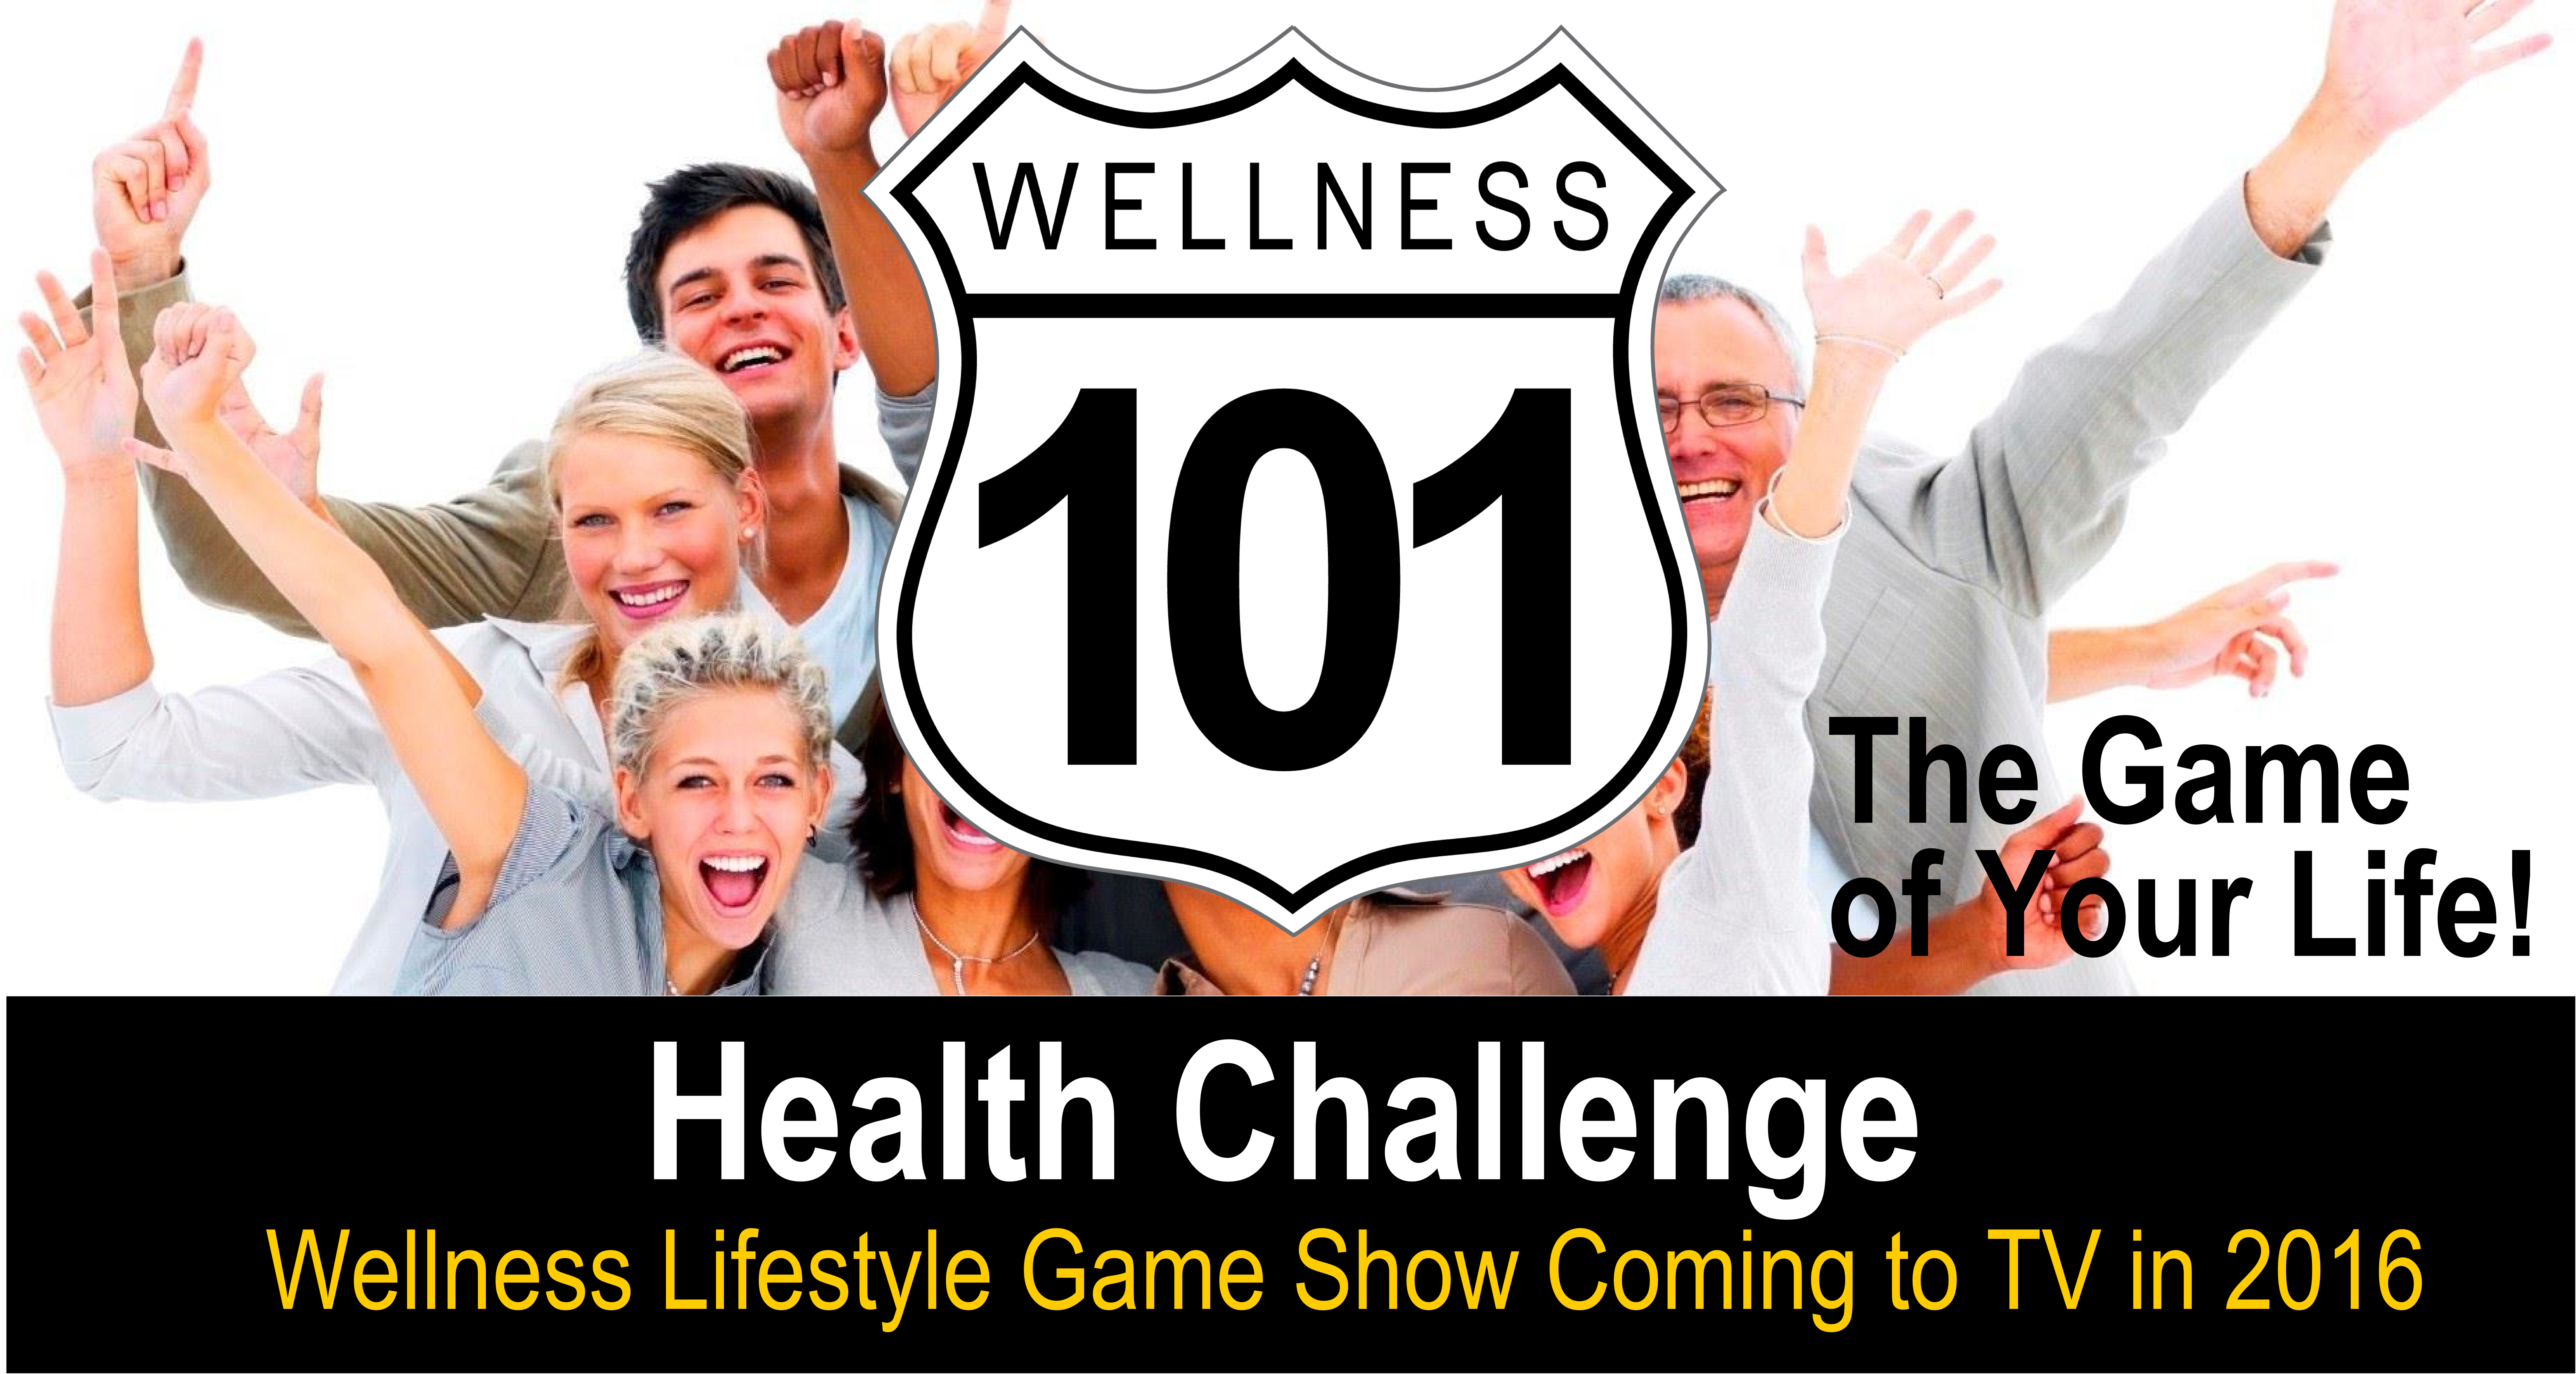 Wellness 101 Health Challenge - December 5th, 10 AM to 12PM